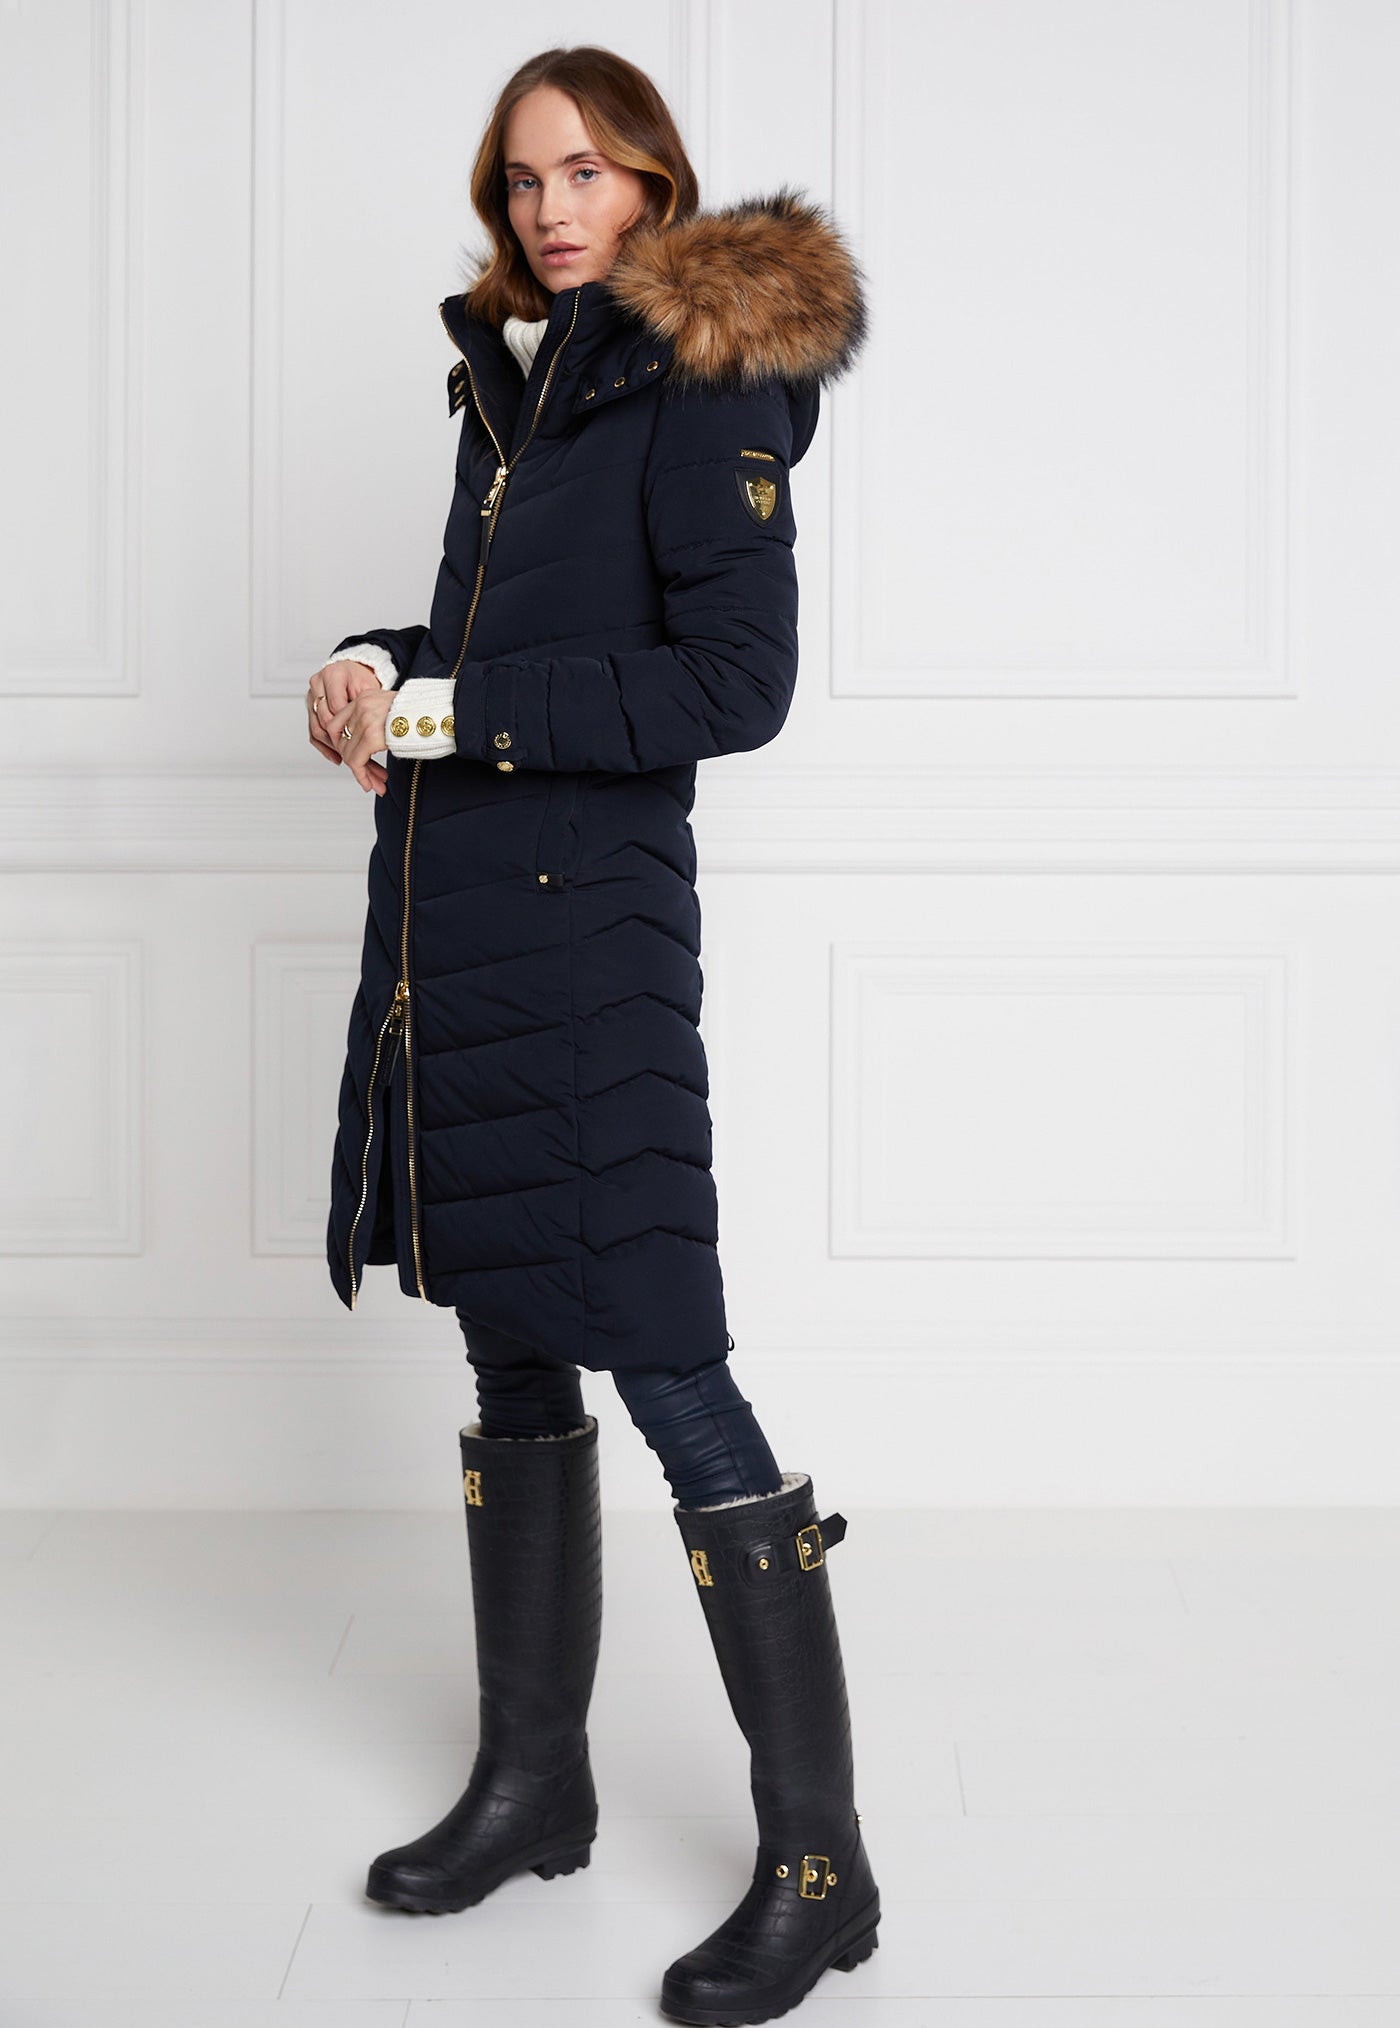 The Wellington Coat - Ink Navy sold by Angel Divine